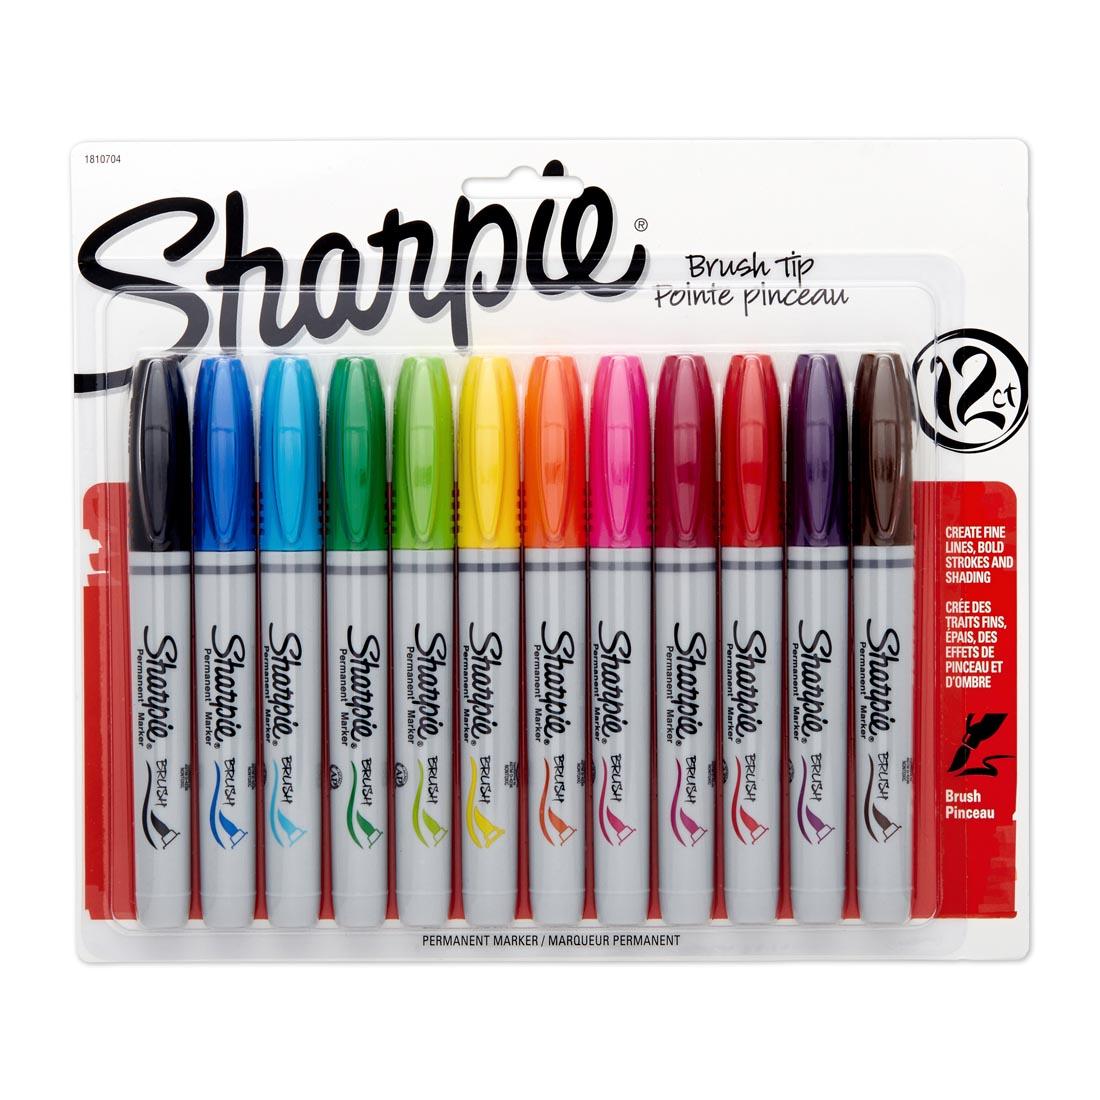 Sharpie Brush Tip Permanent Marker 12-Color Set shown in package